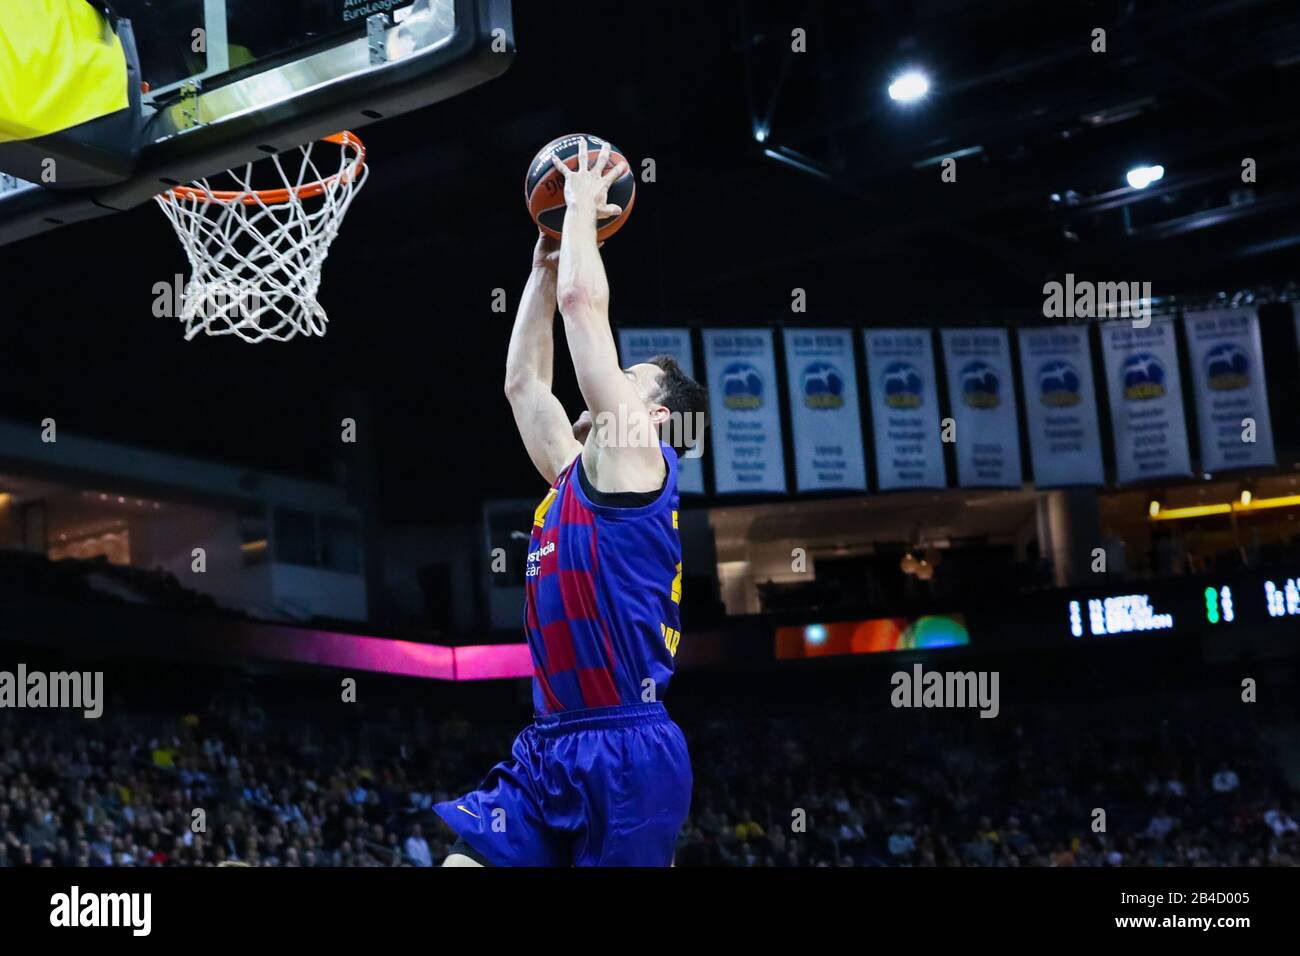 Berlin, Germany, March 04, 2020:Kyle Kuric of FC Barcelona Basketball in action during the EuroLeague basketball match Stock Photo